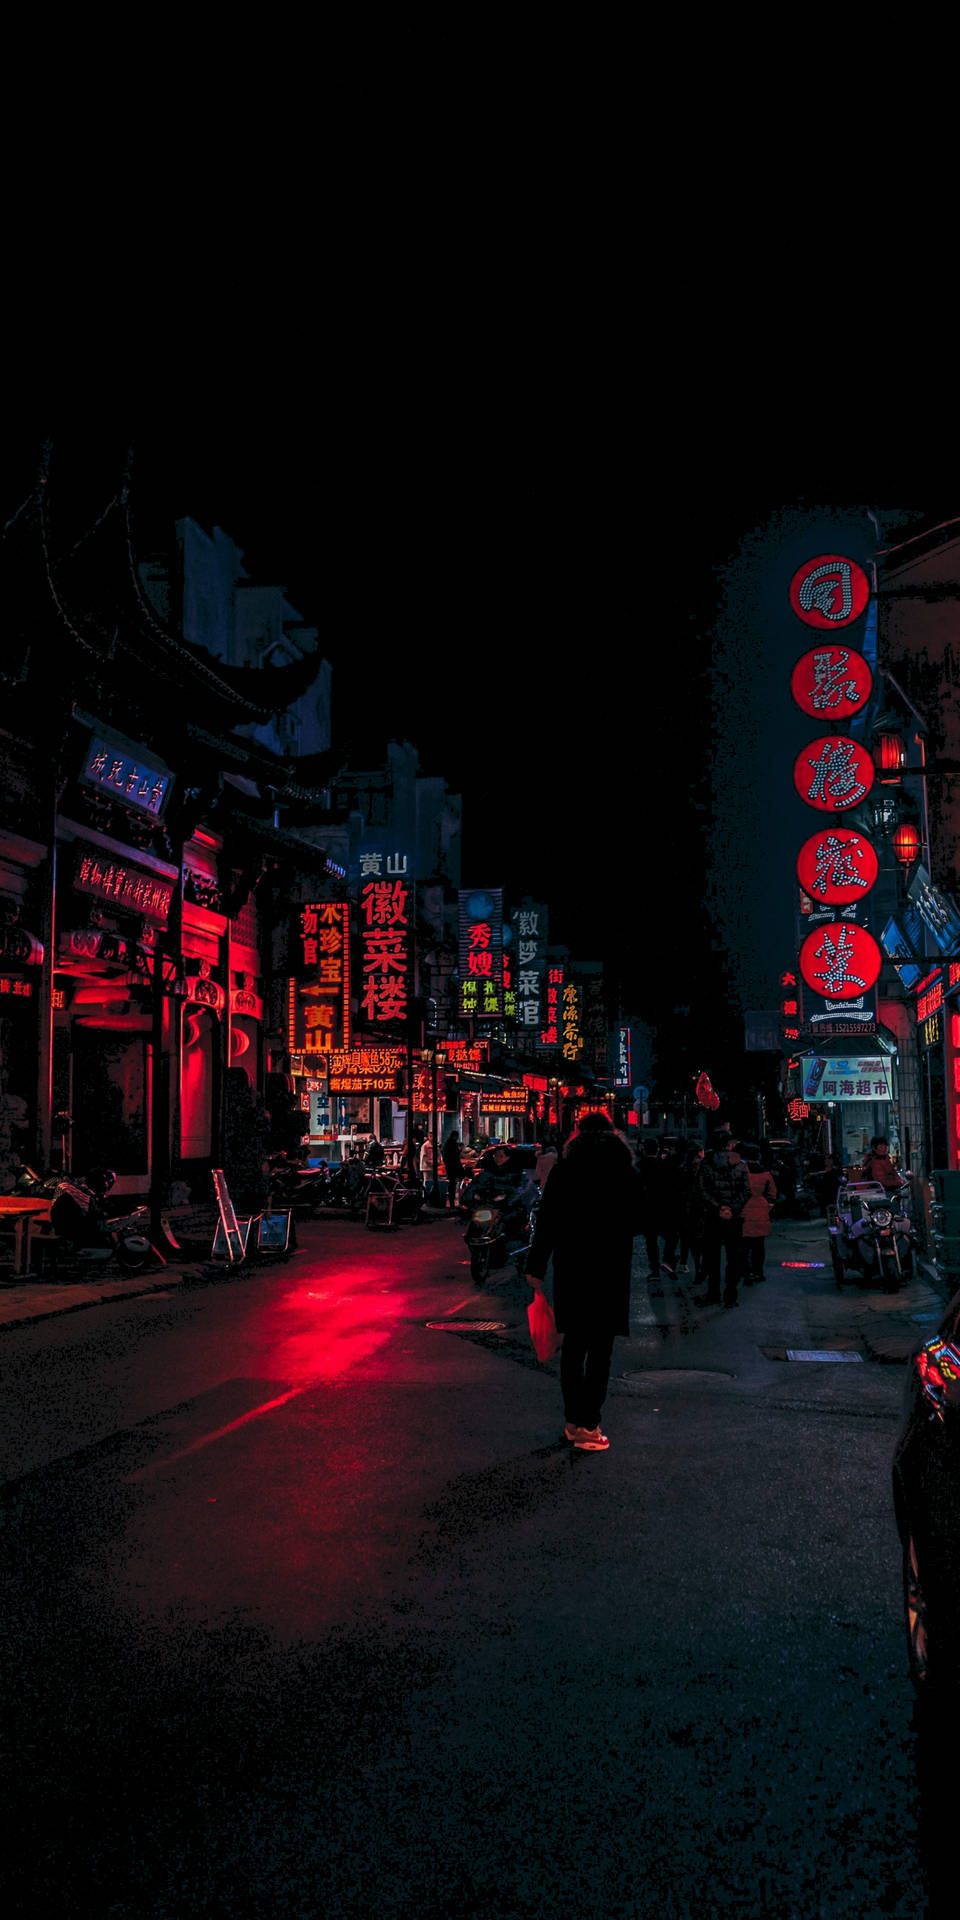 A street at night with red neon lights - Cyberpunk, anime city